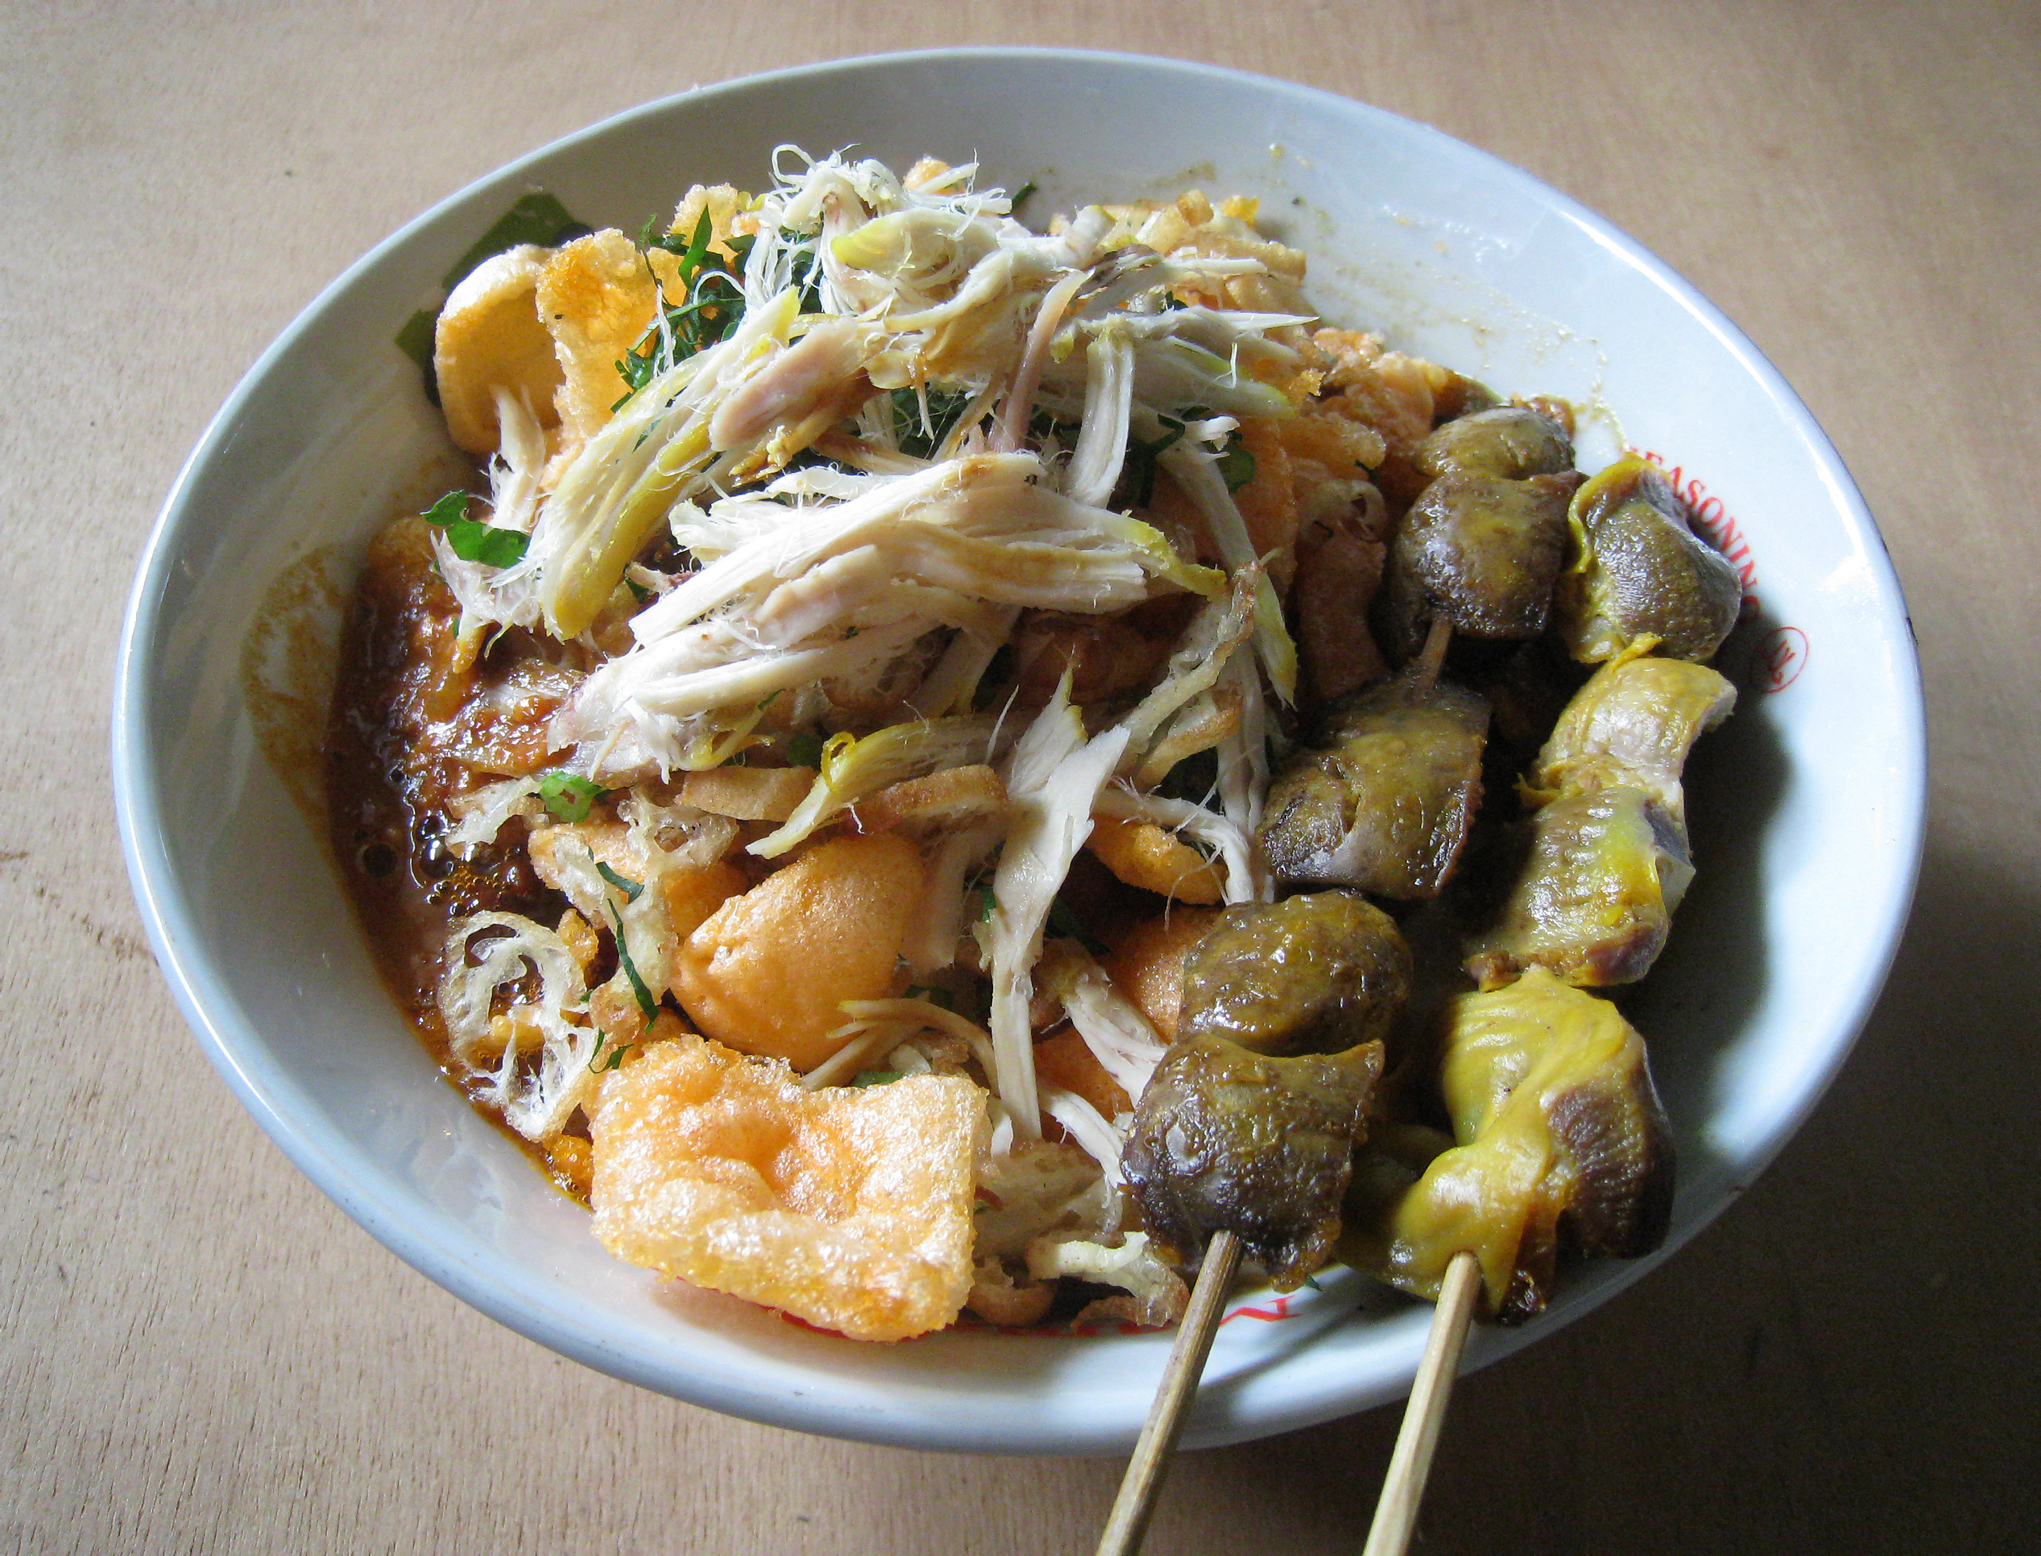 A Bubur Ayam (chicken rice congee) with chicken liver and gizzard satay, sold by travelling vendor cart that frequenting kampung or residential area every morning in Jakarta, Indonesia.